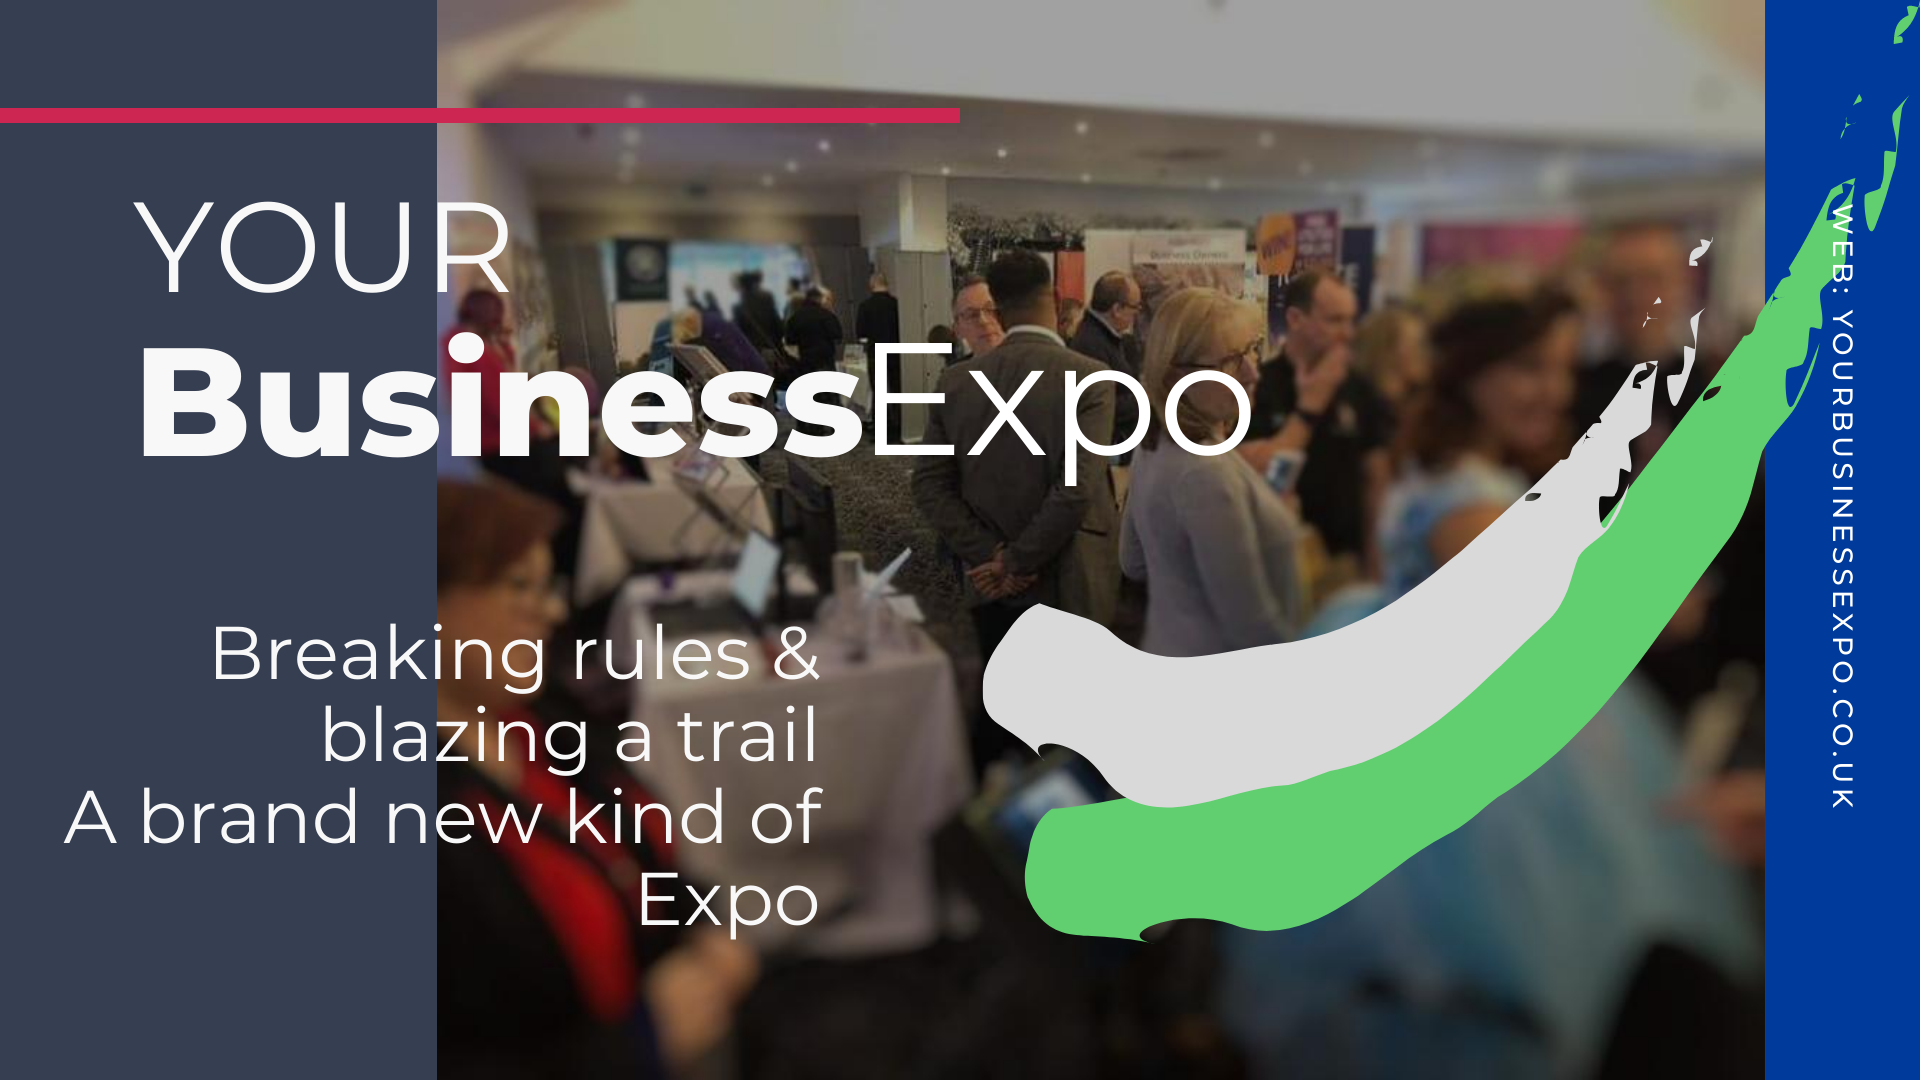 Your Business Virtual Expo – 13th October 2020